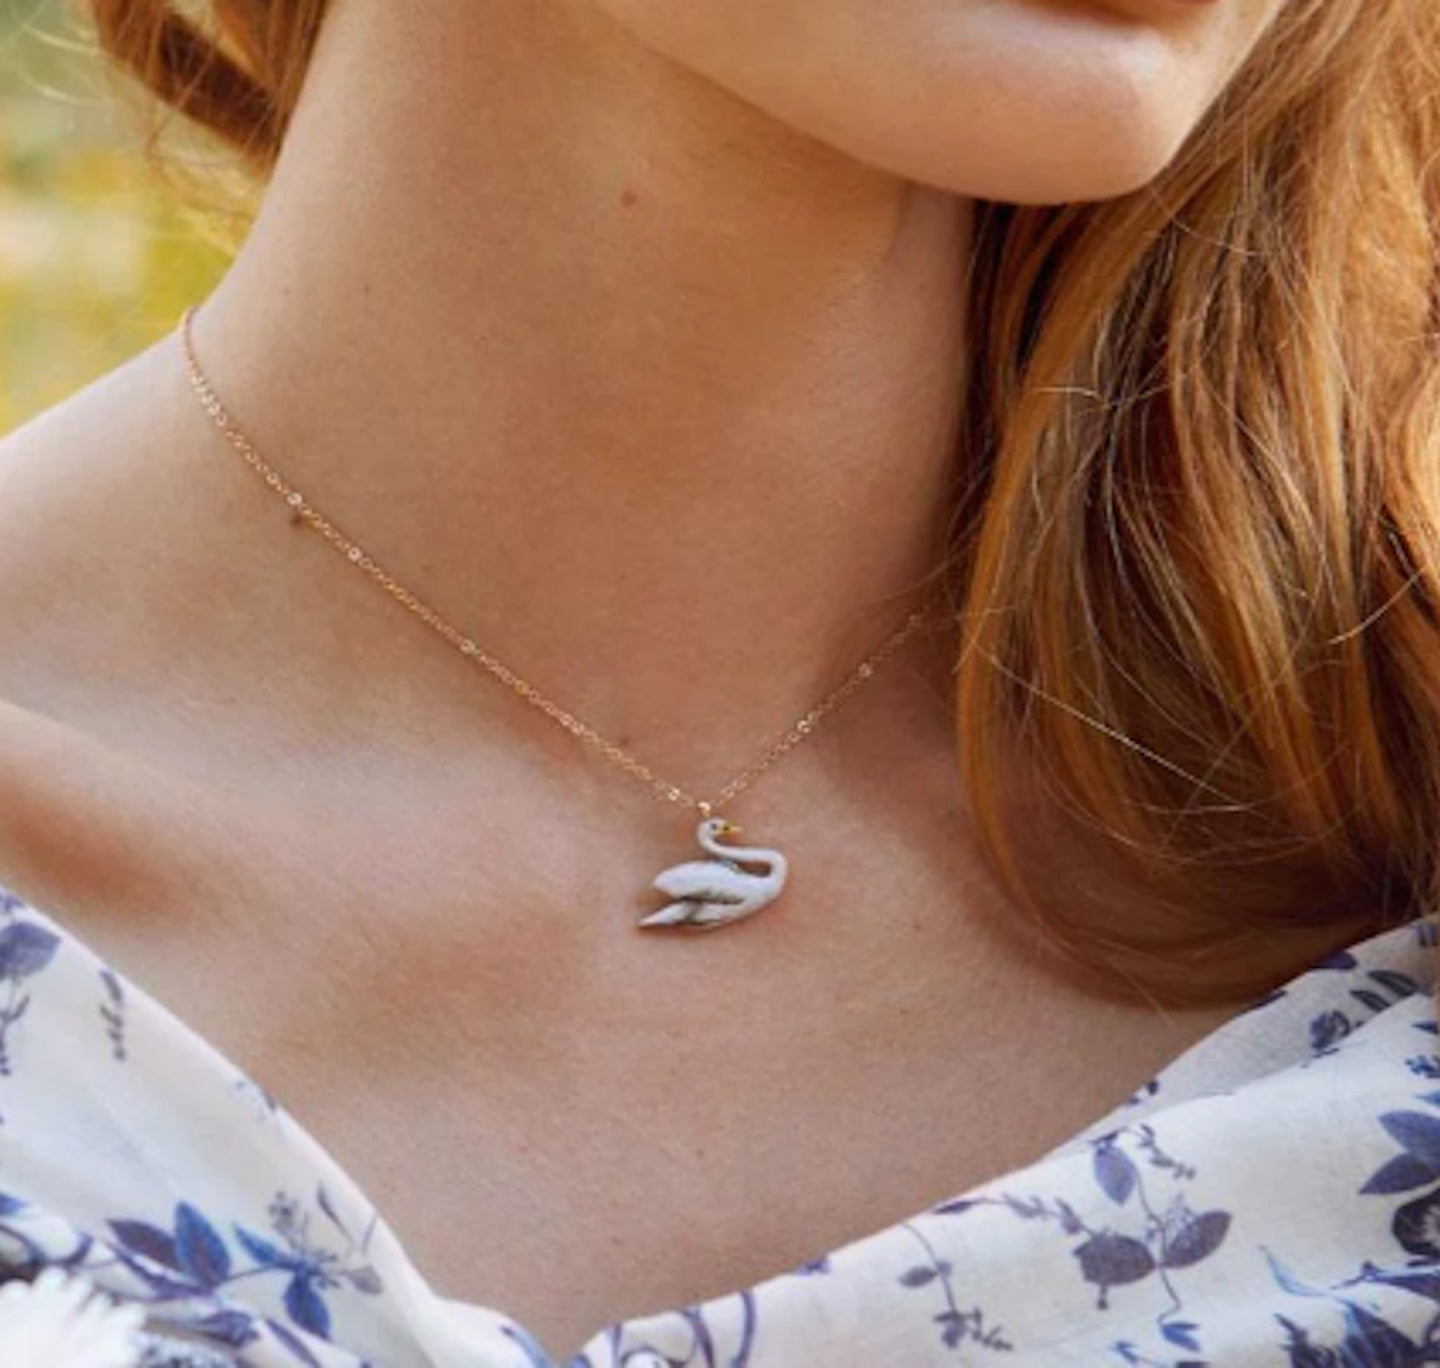 Necklace: Swan